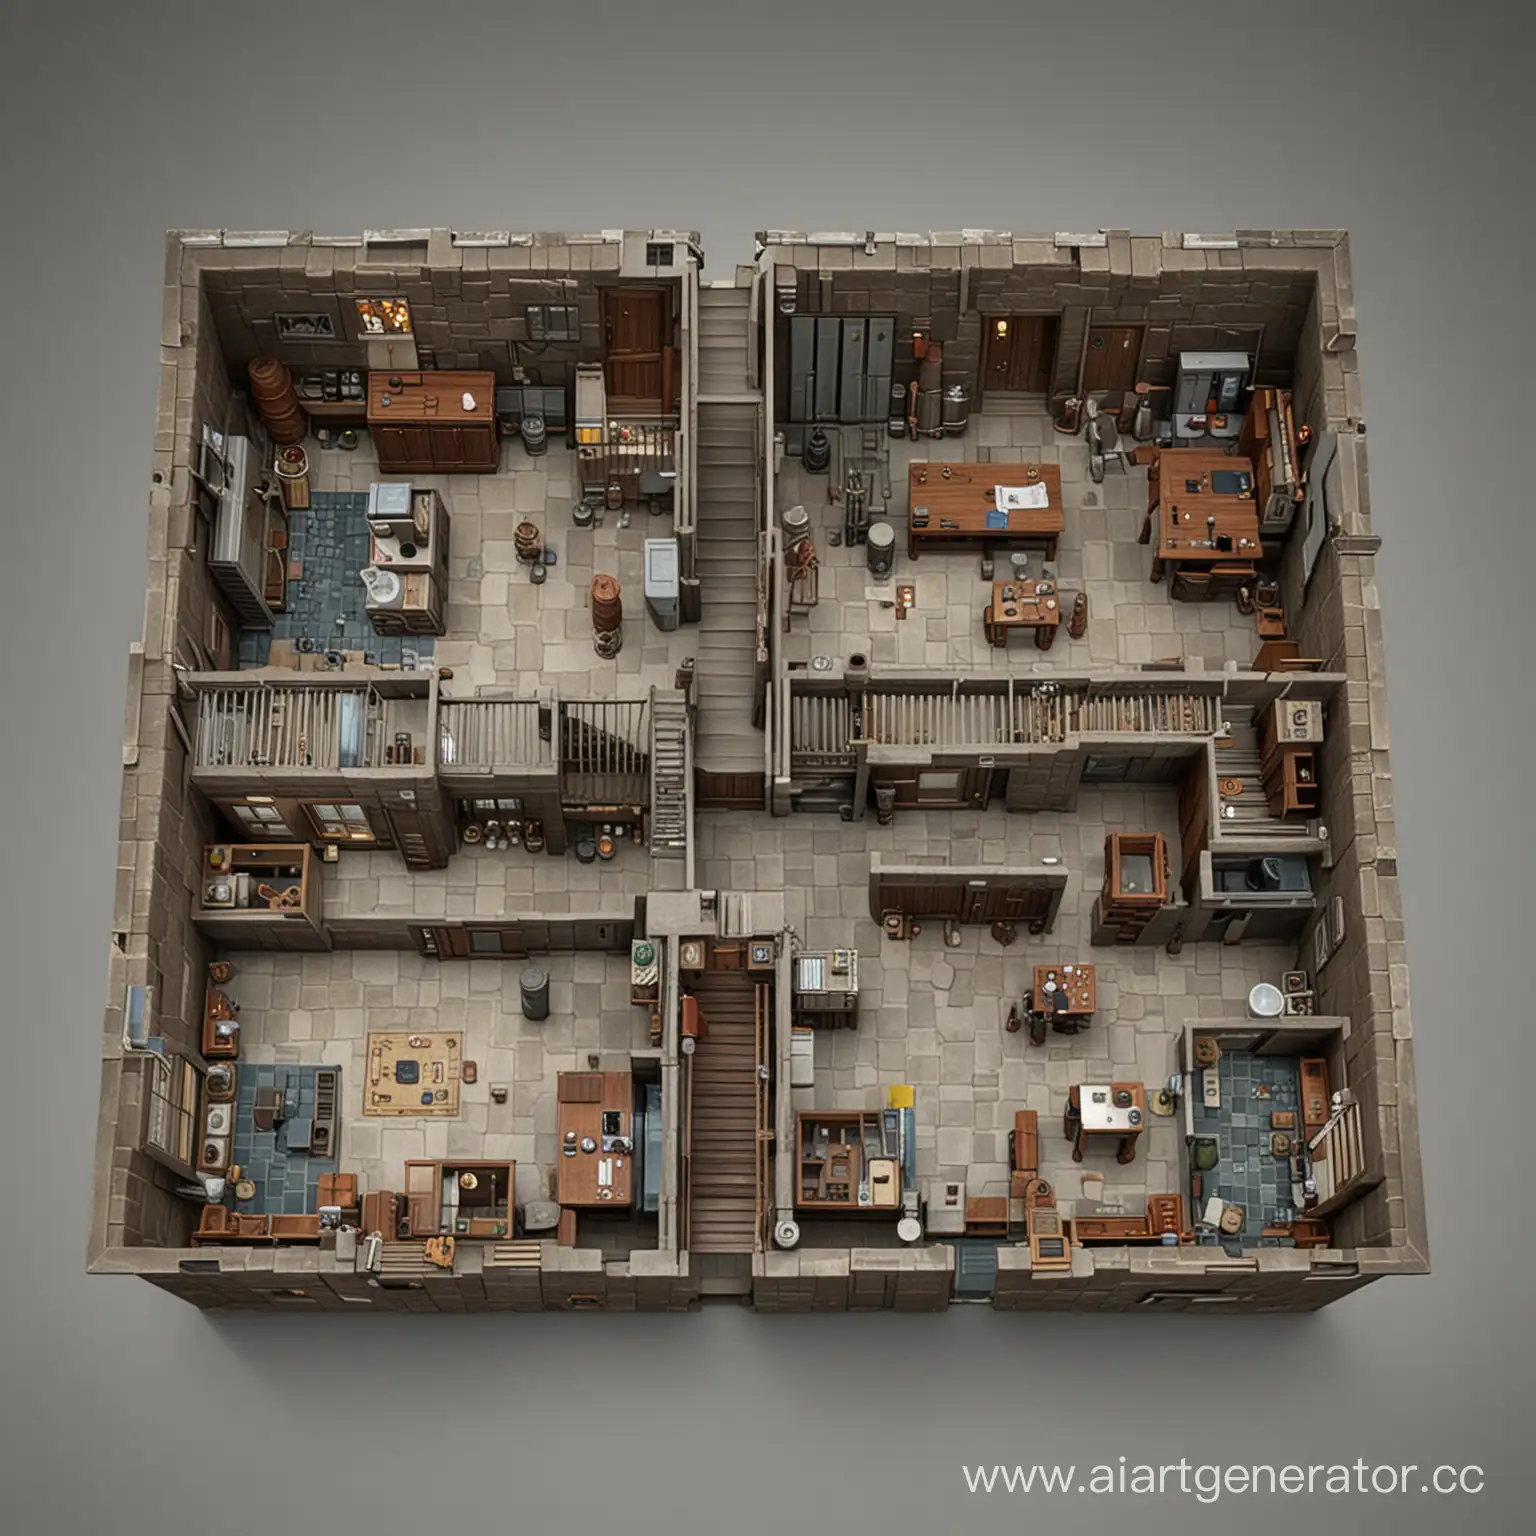 Aerial-View-of-DD-Laboratory-with-Four-Rooms-and-Basement-Staircase